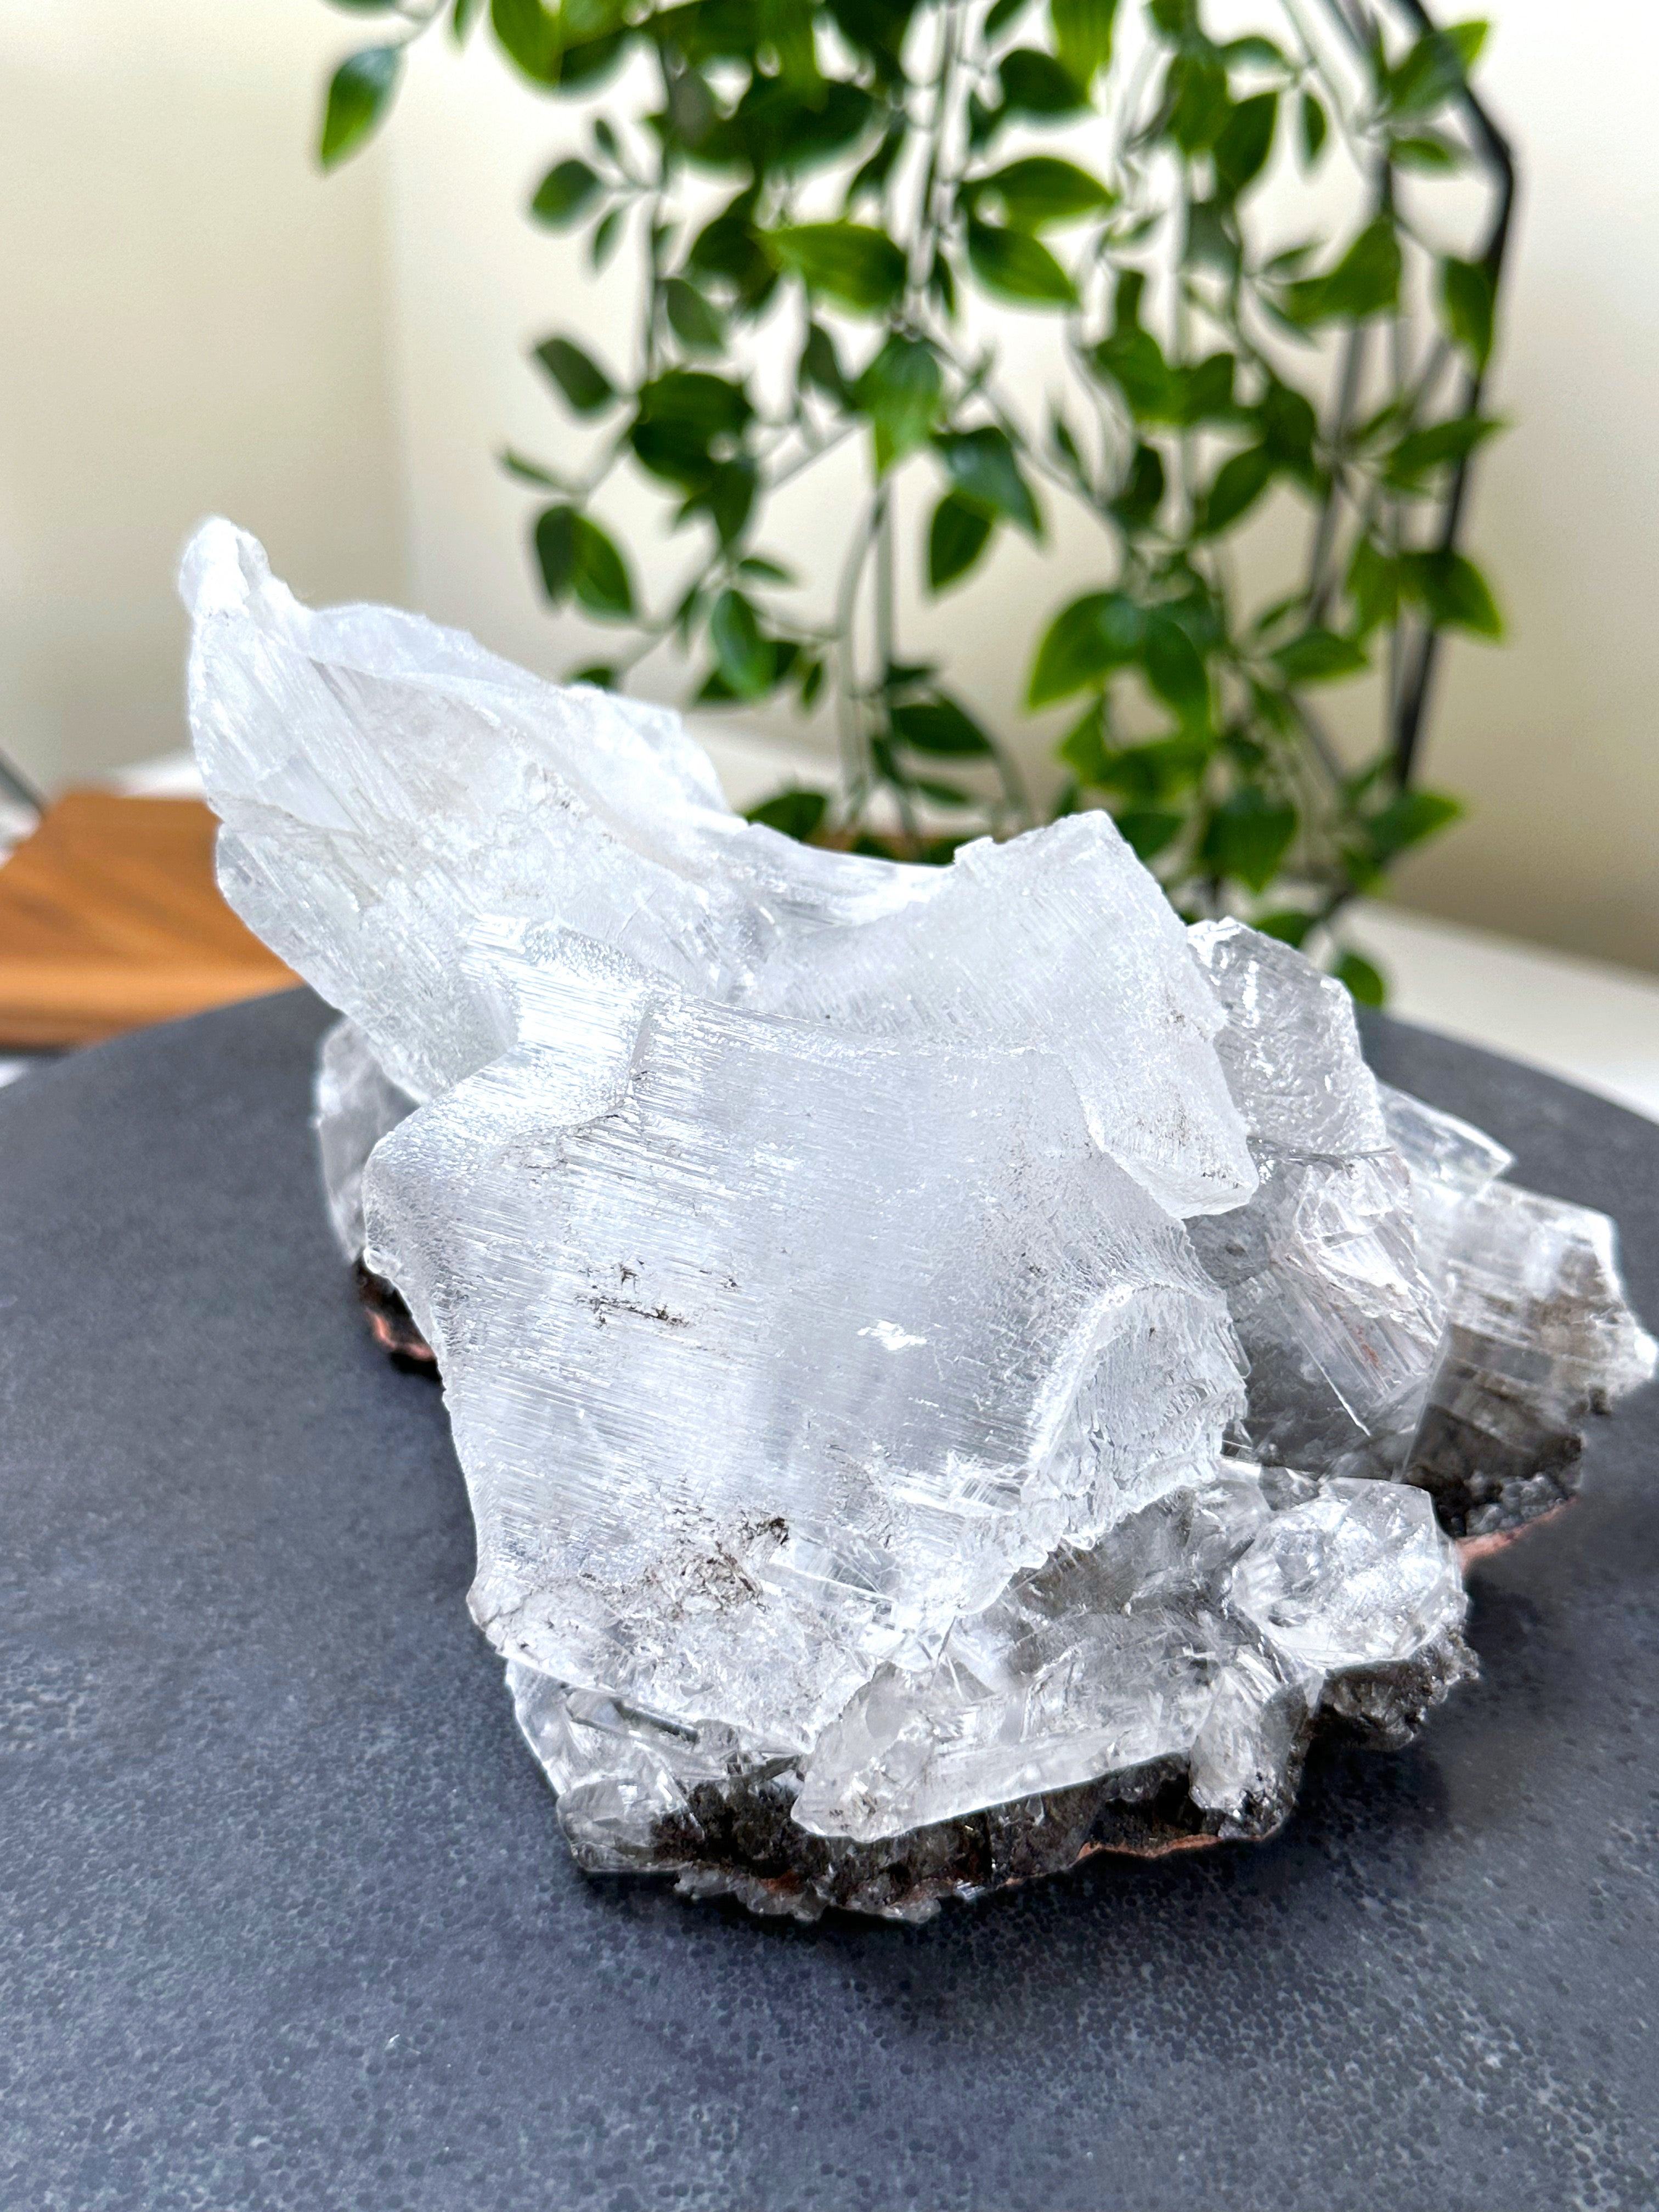 NAICA SELENITE 4 - naica mine, naica selenite, once in a blue moon, one of a kind, Recently added, selenite - The Mineral Maven